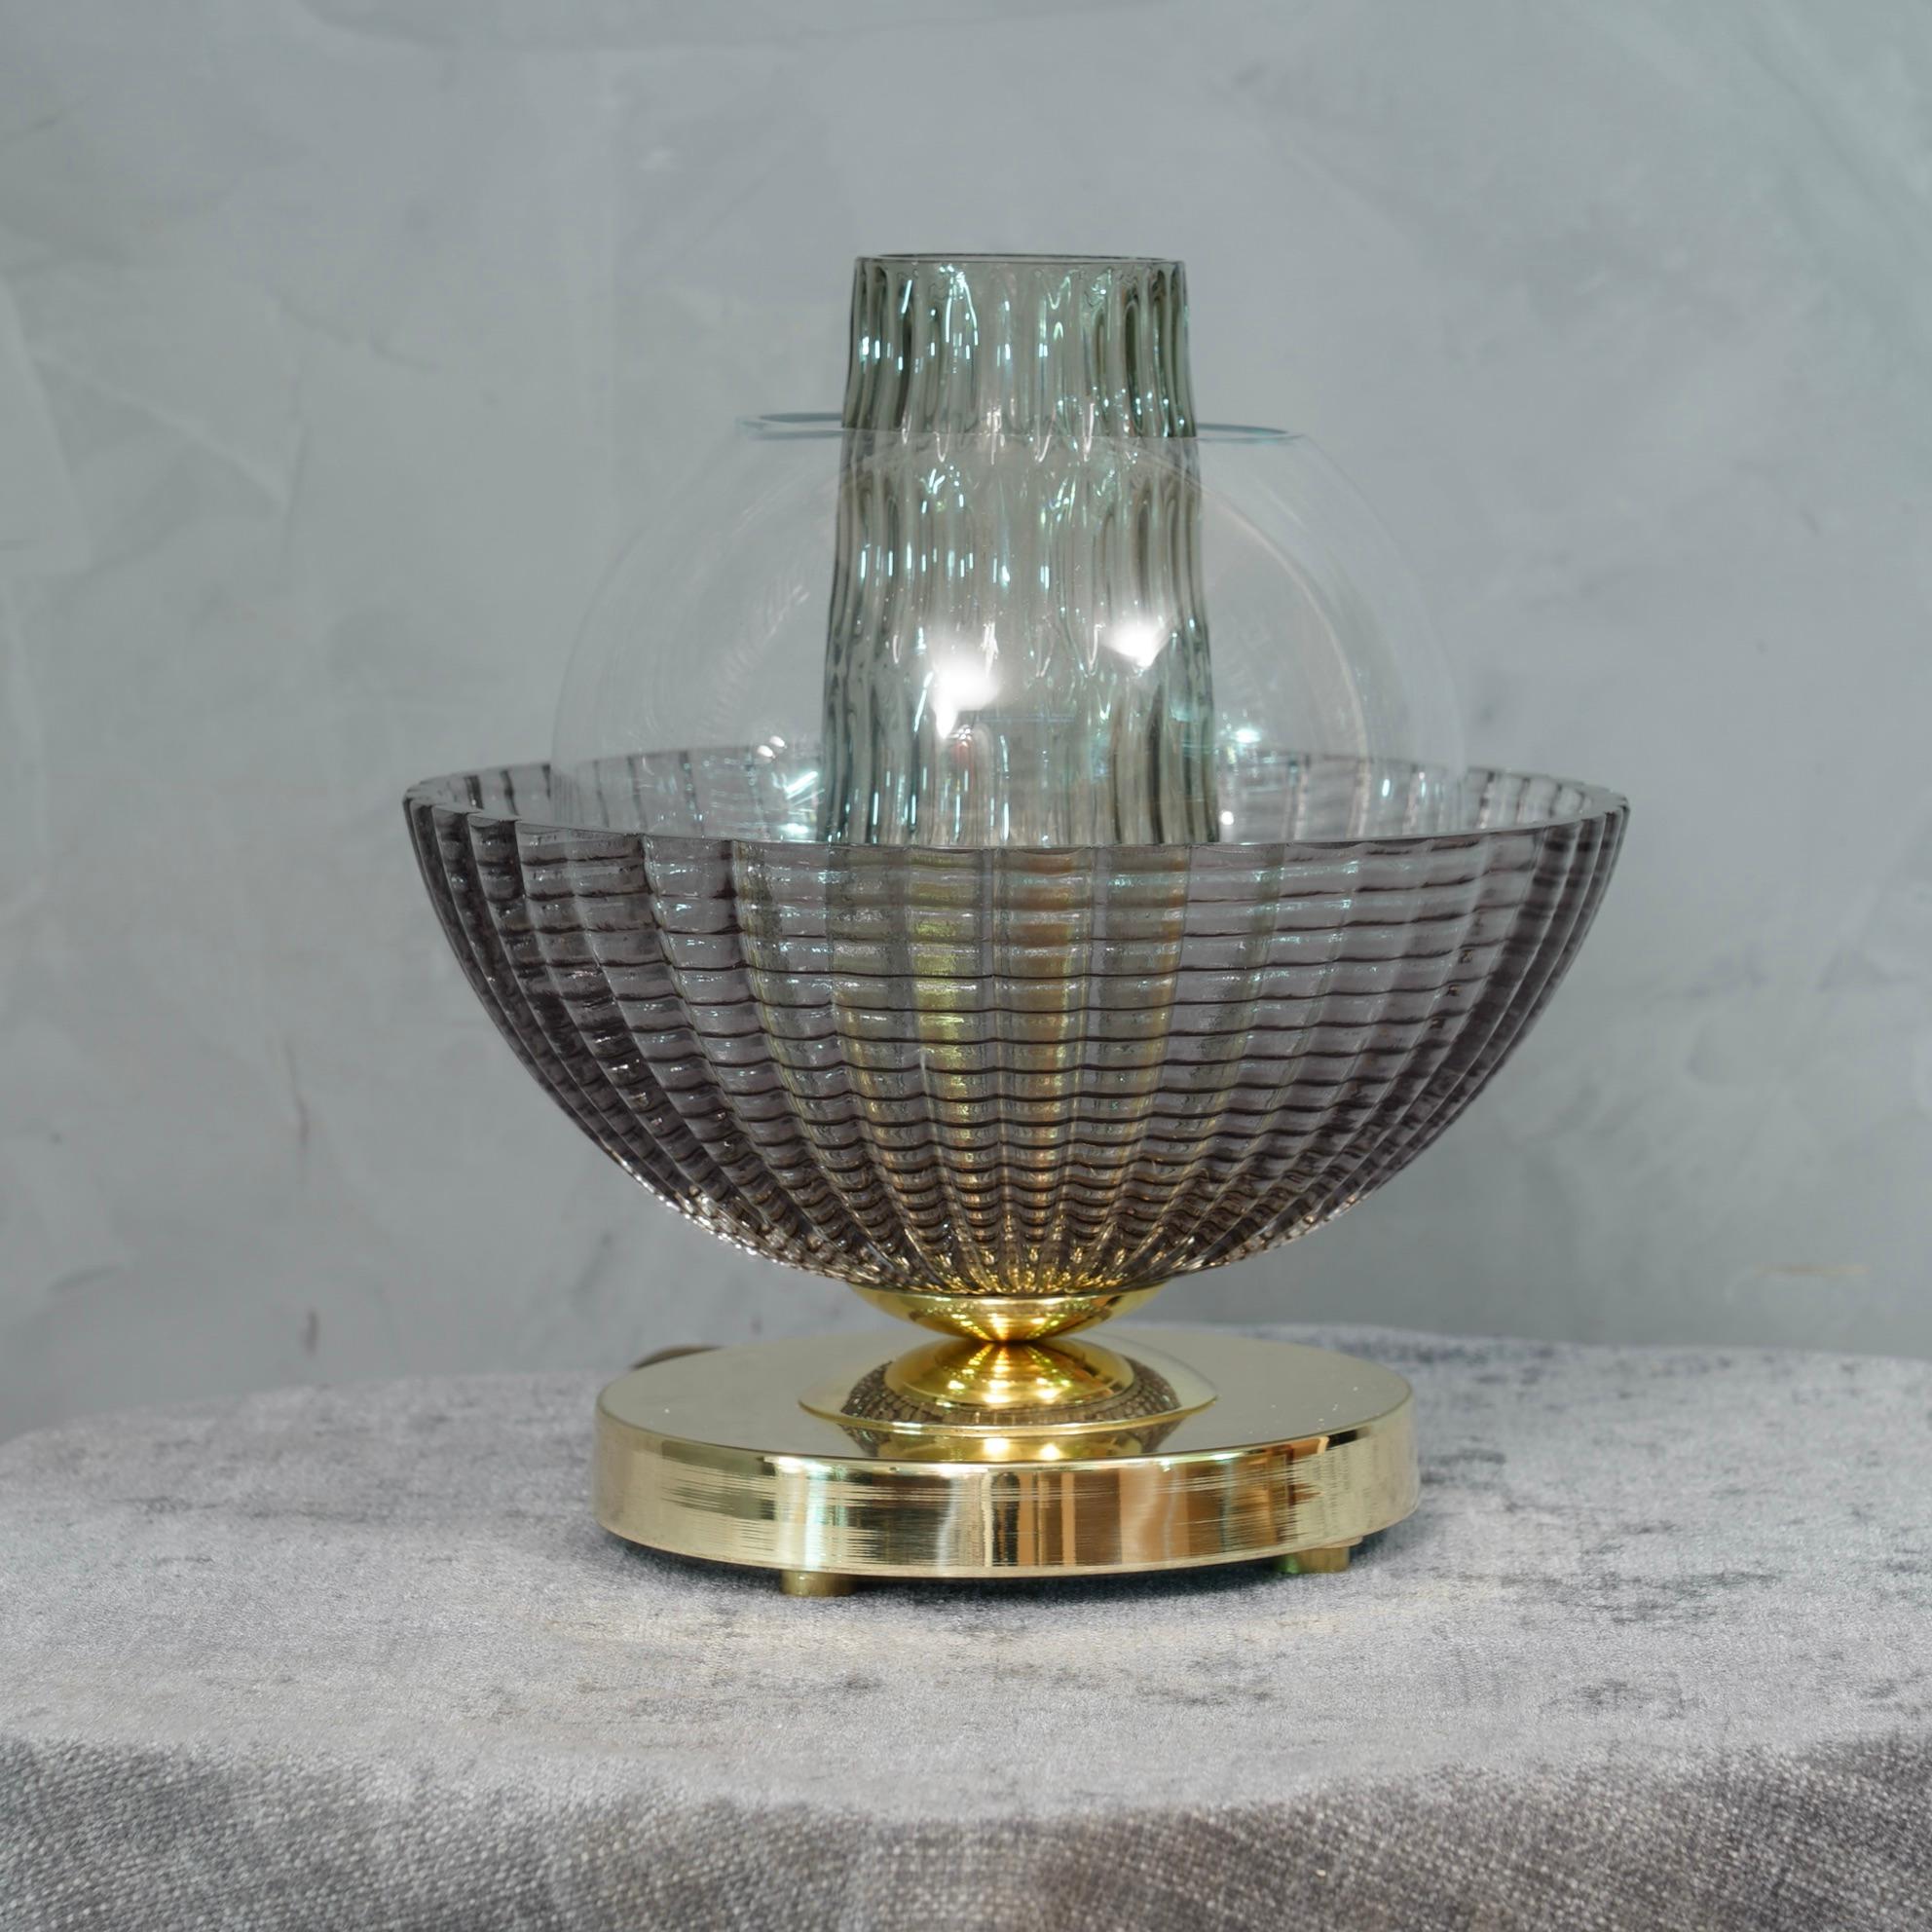 A very special and original Murano table lamps, a series of round glass arranged one on top of the other, in a smoked and brass color. Their shape is fascinating.

The lamp is composed of a round brass base, where cope in Murano glass have been